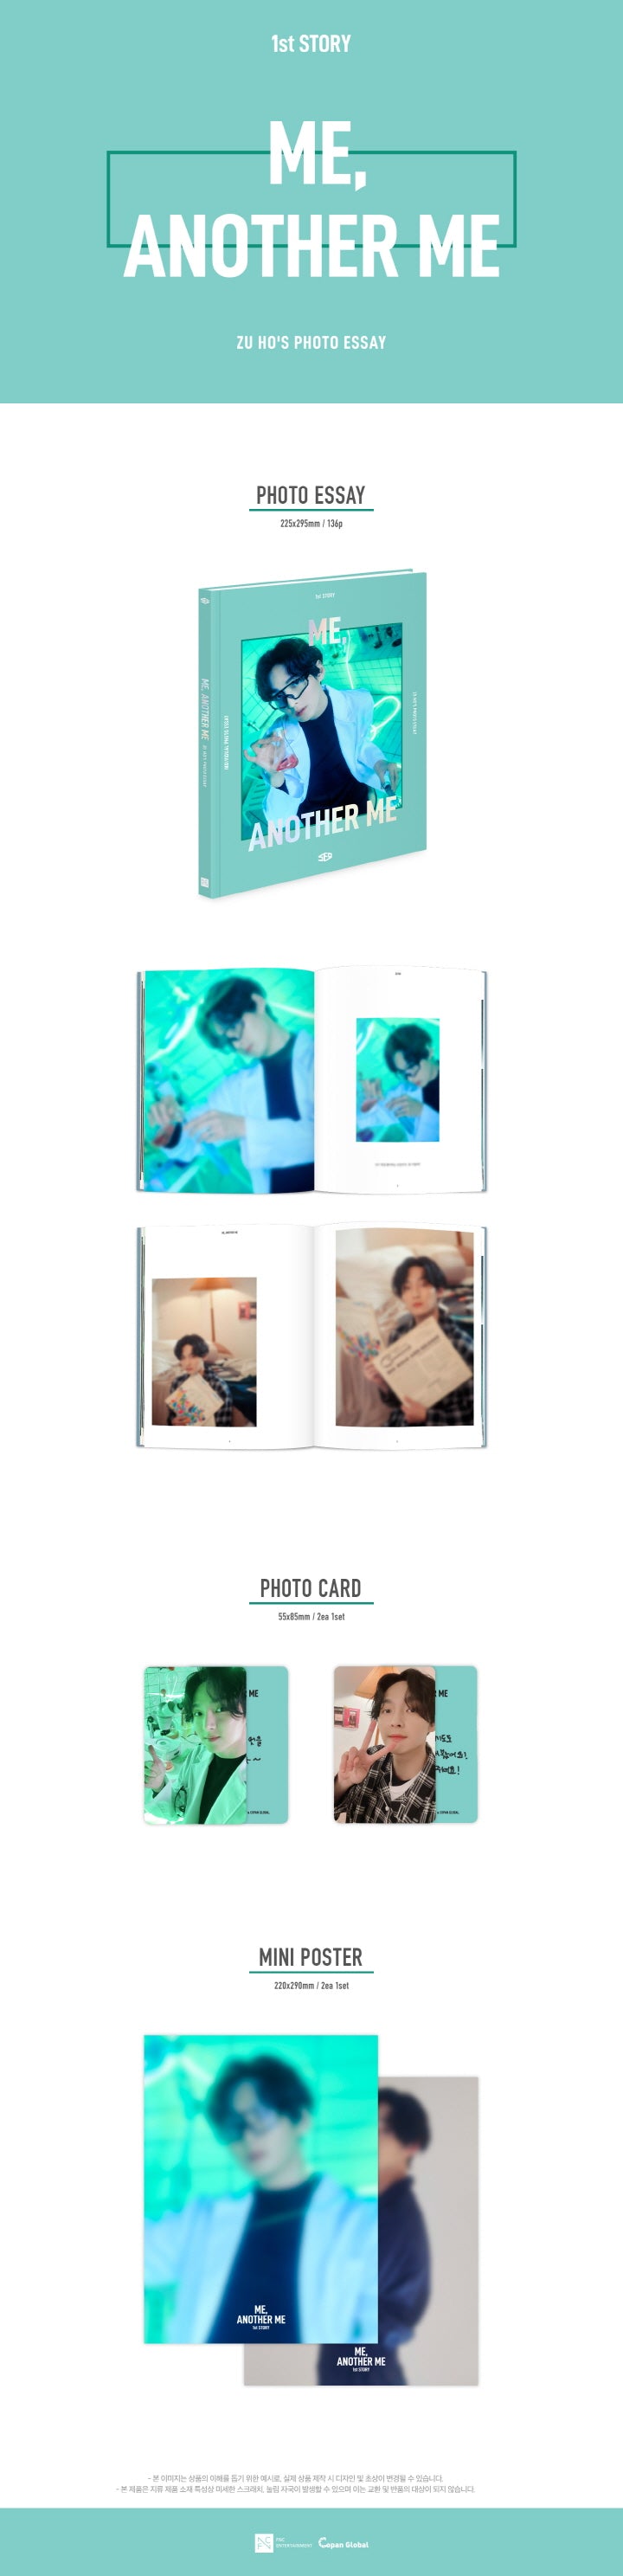 1 Photo Essay (136 pages)
2 Photo Cards
2 Mini Posters